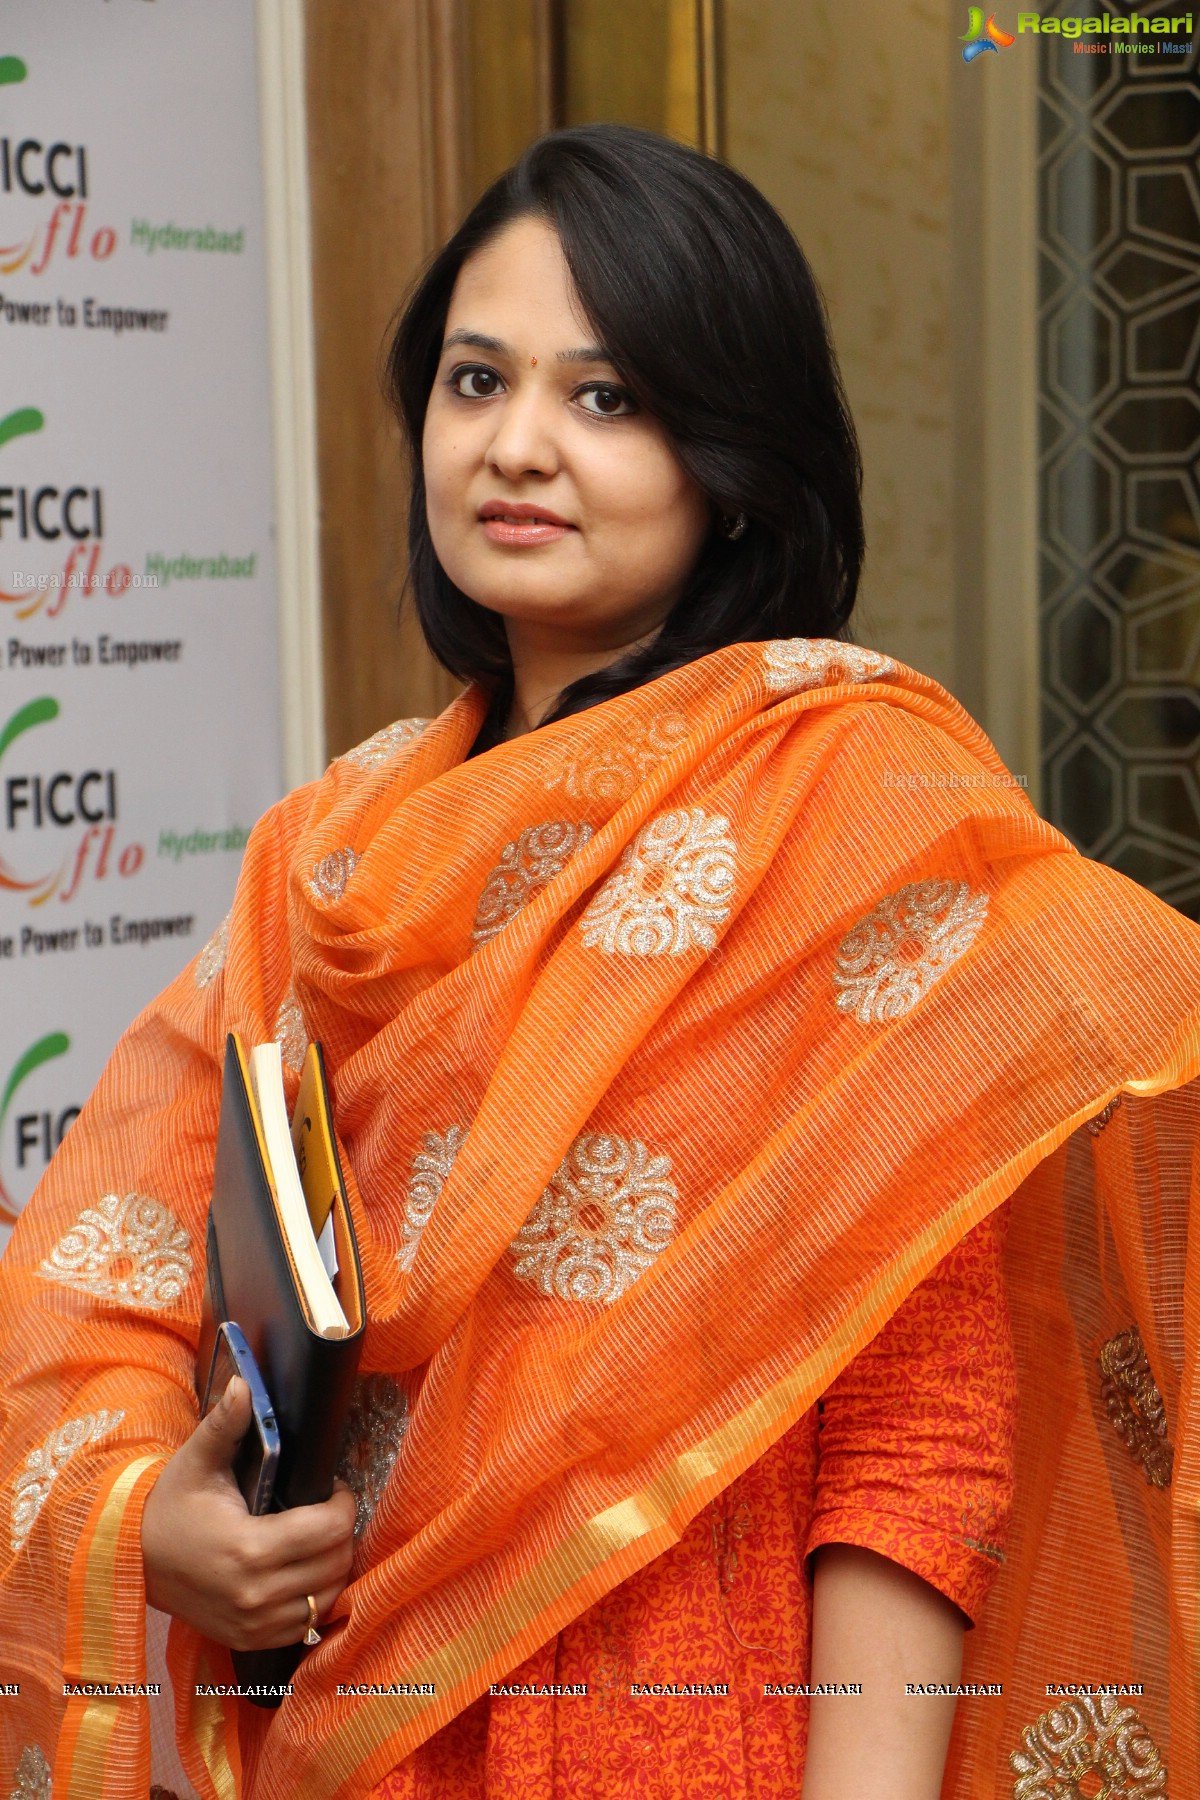 FICCI - A Workshop and Interactive Session on Women on Board at ITC Kakatiya, Hyderabad